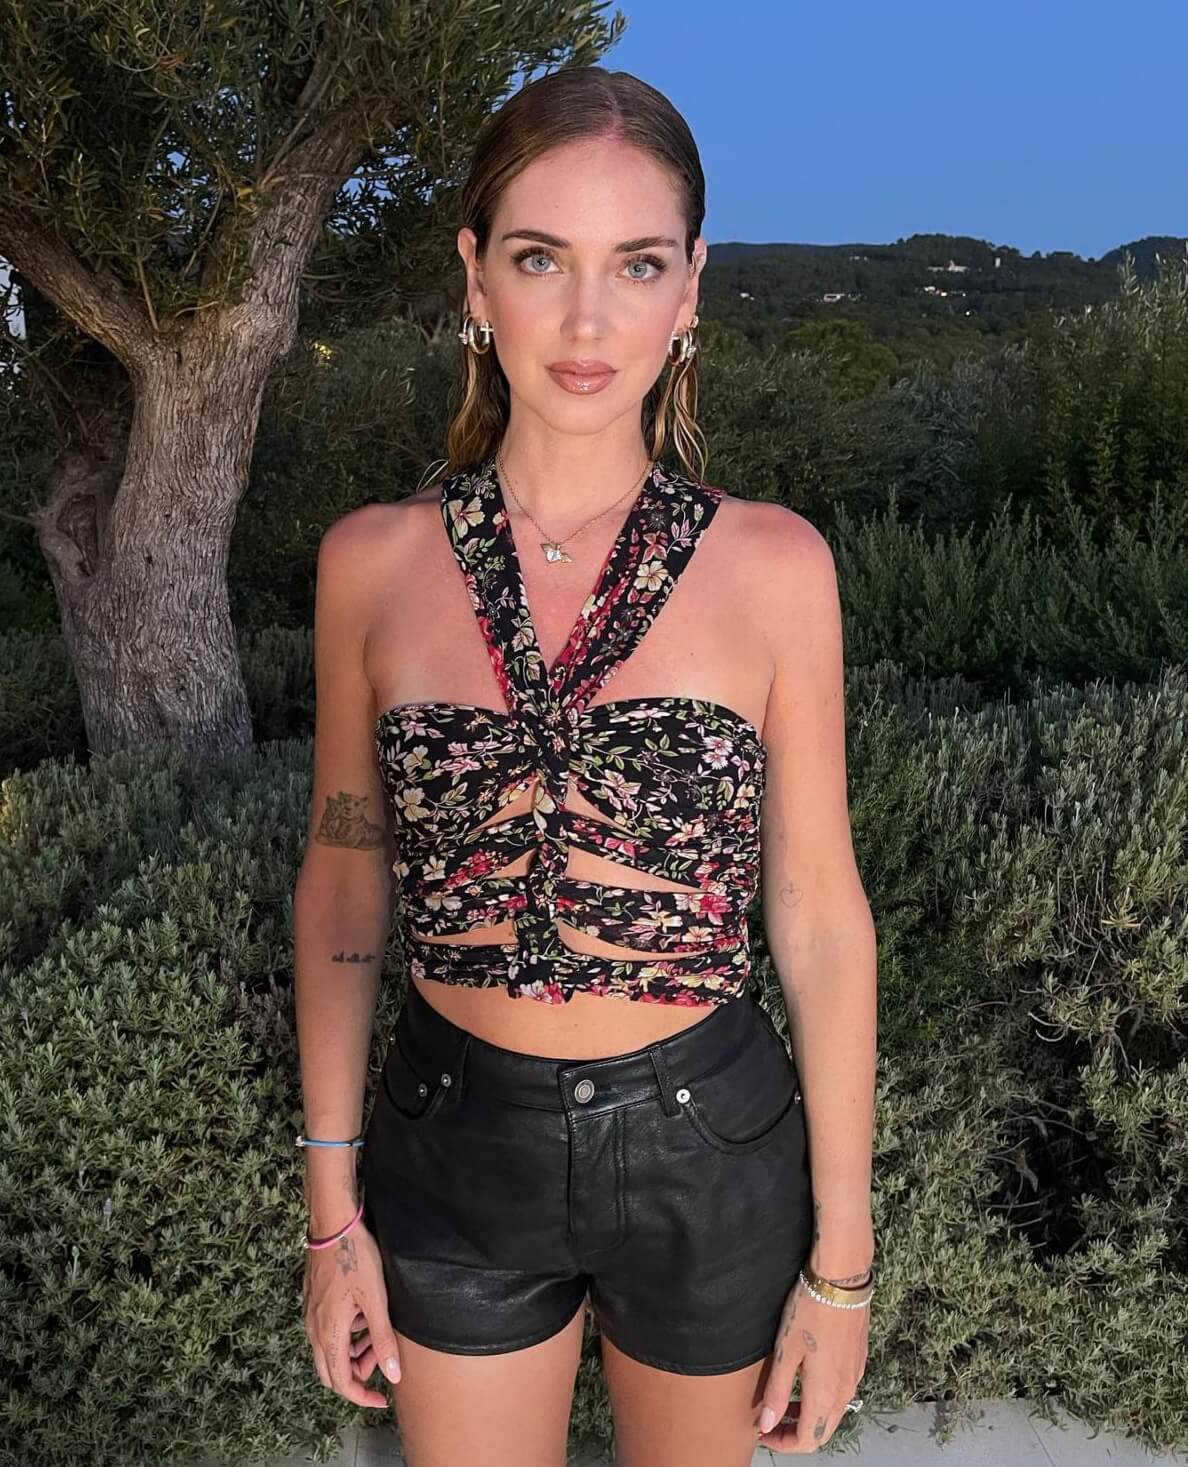 Chiara Ferragni Lovely Looks In Wrapped Top With Black Leather Shorts